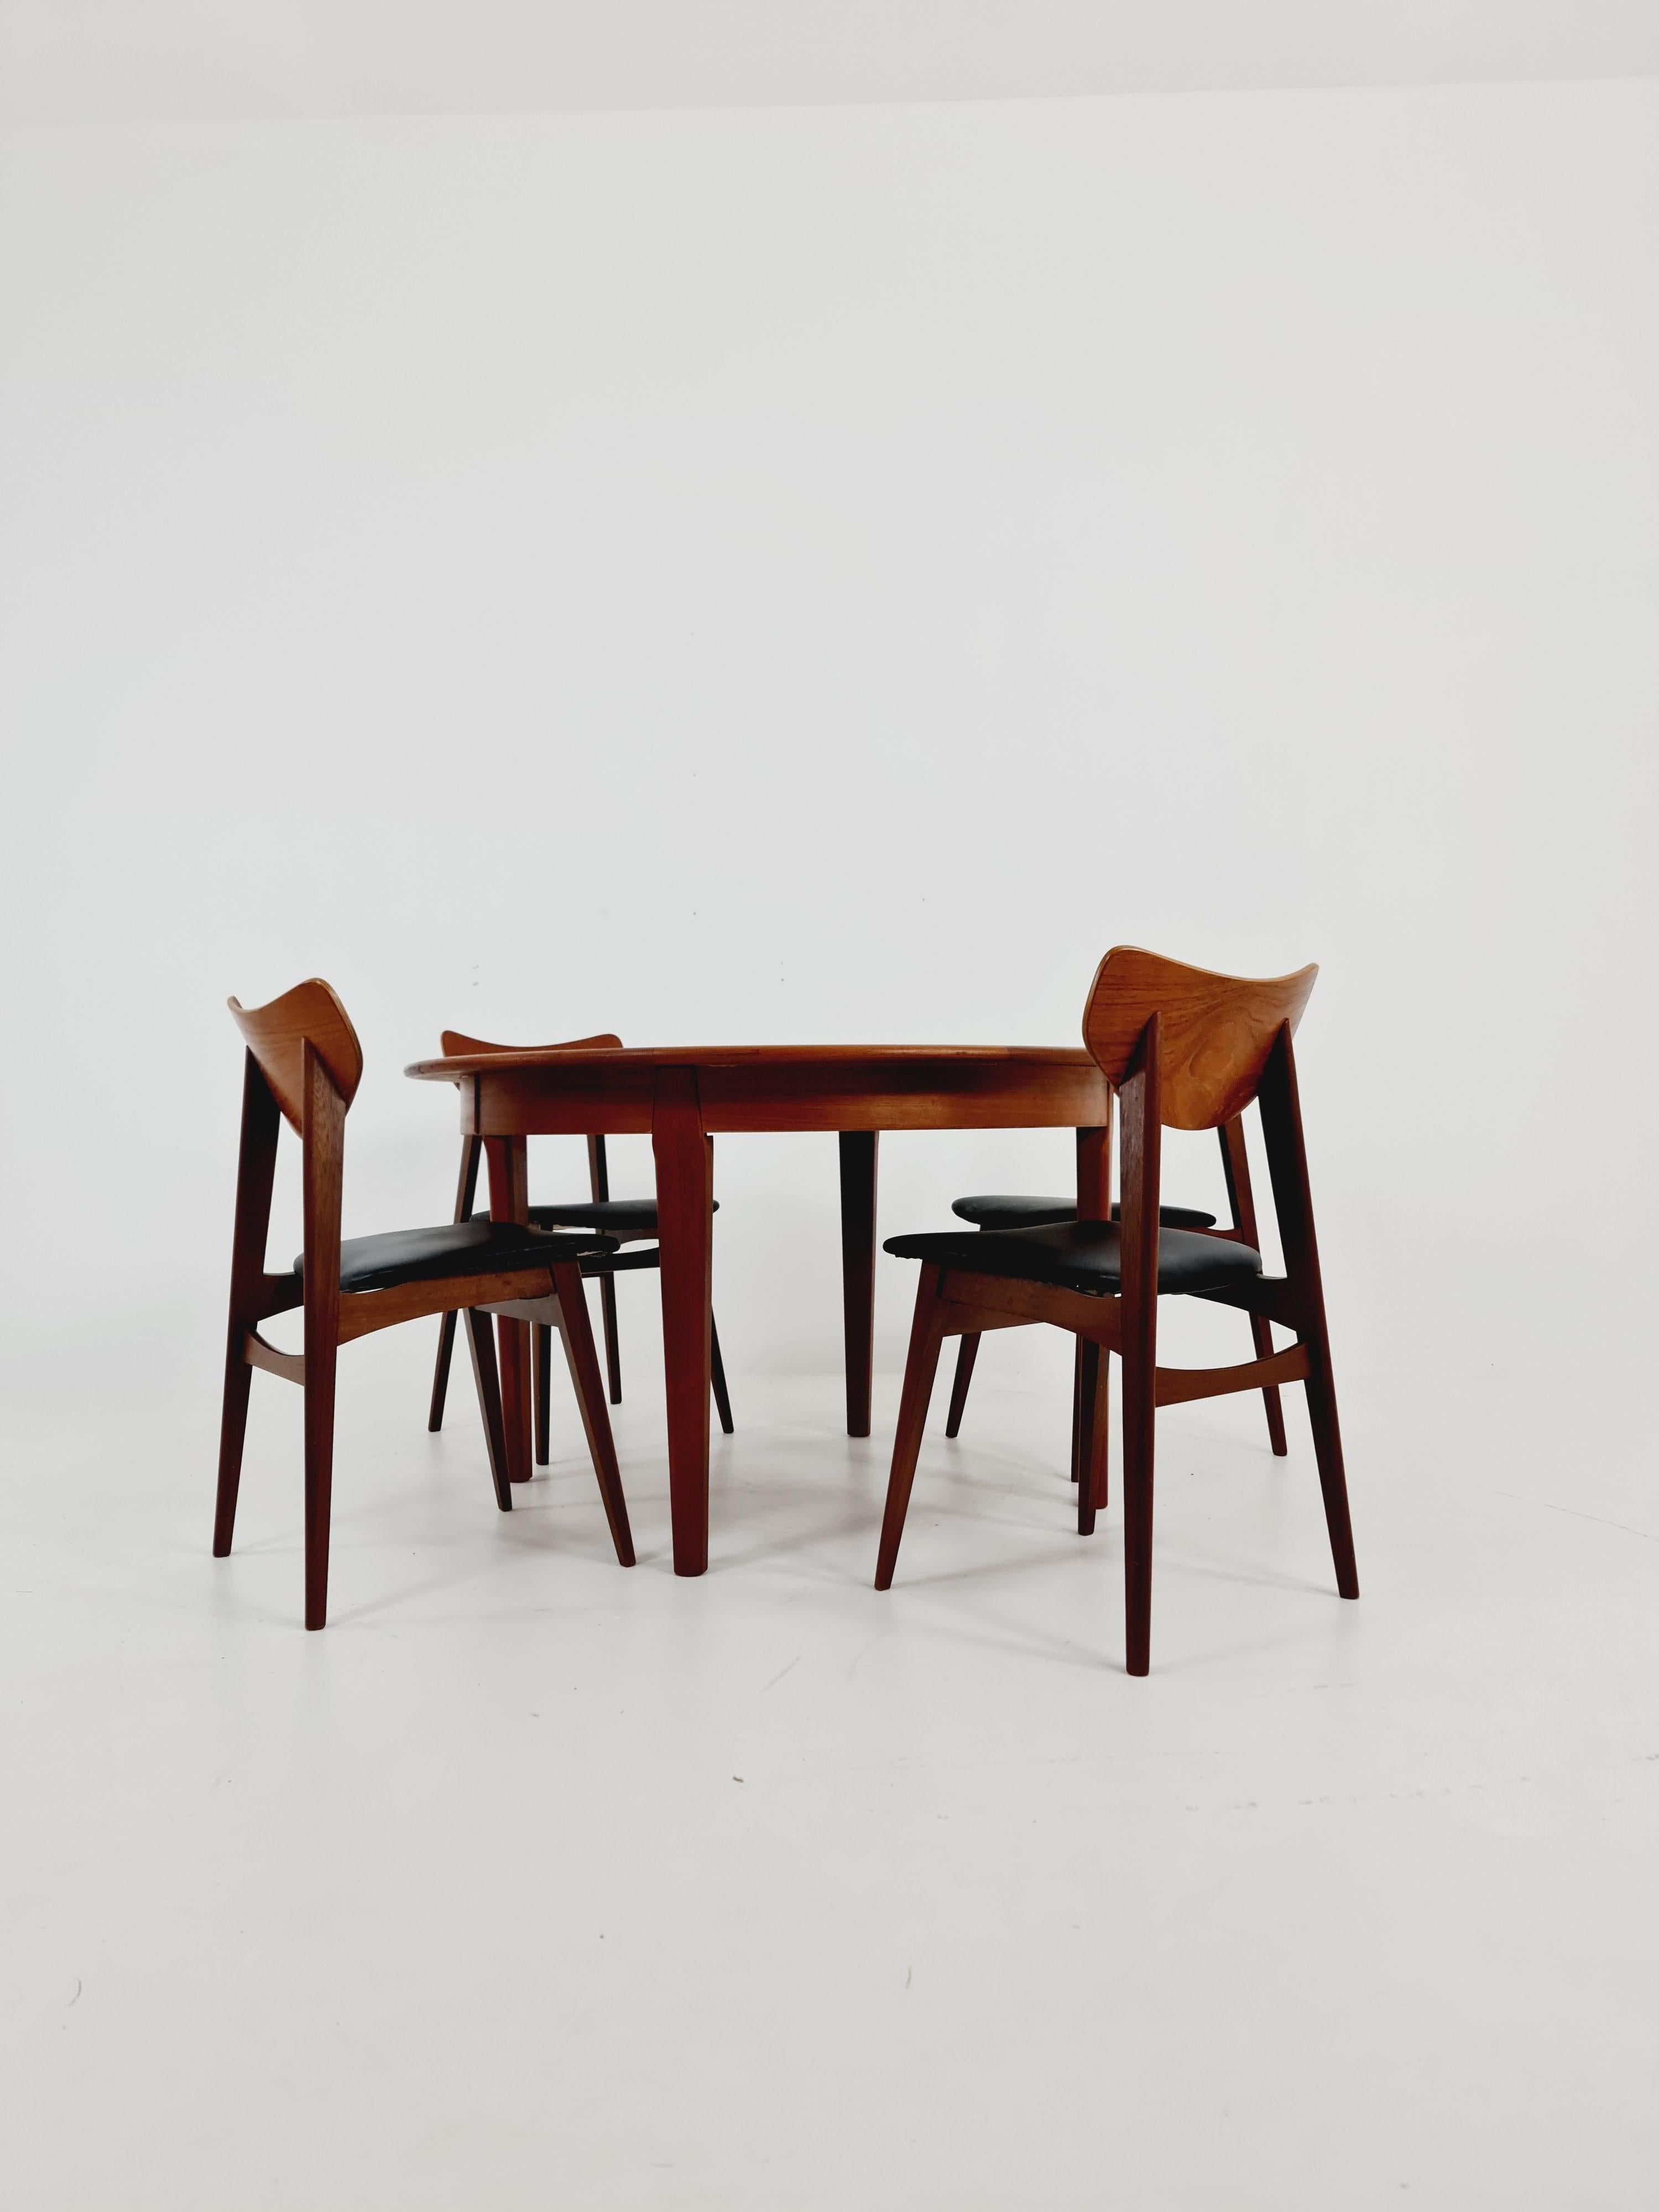 Danish Modern Falster Teak Expandable Dining Table, 1960s

The table is in very good condition. 

Made in Denmark 

Falster Møblerfabrik

The table can be enlarged very easily by means of the two integrated plates and thus offers enough space for 10